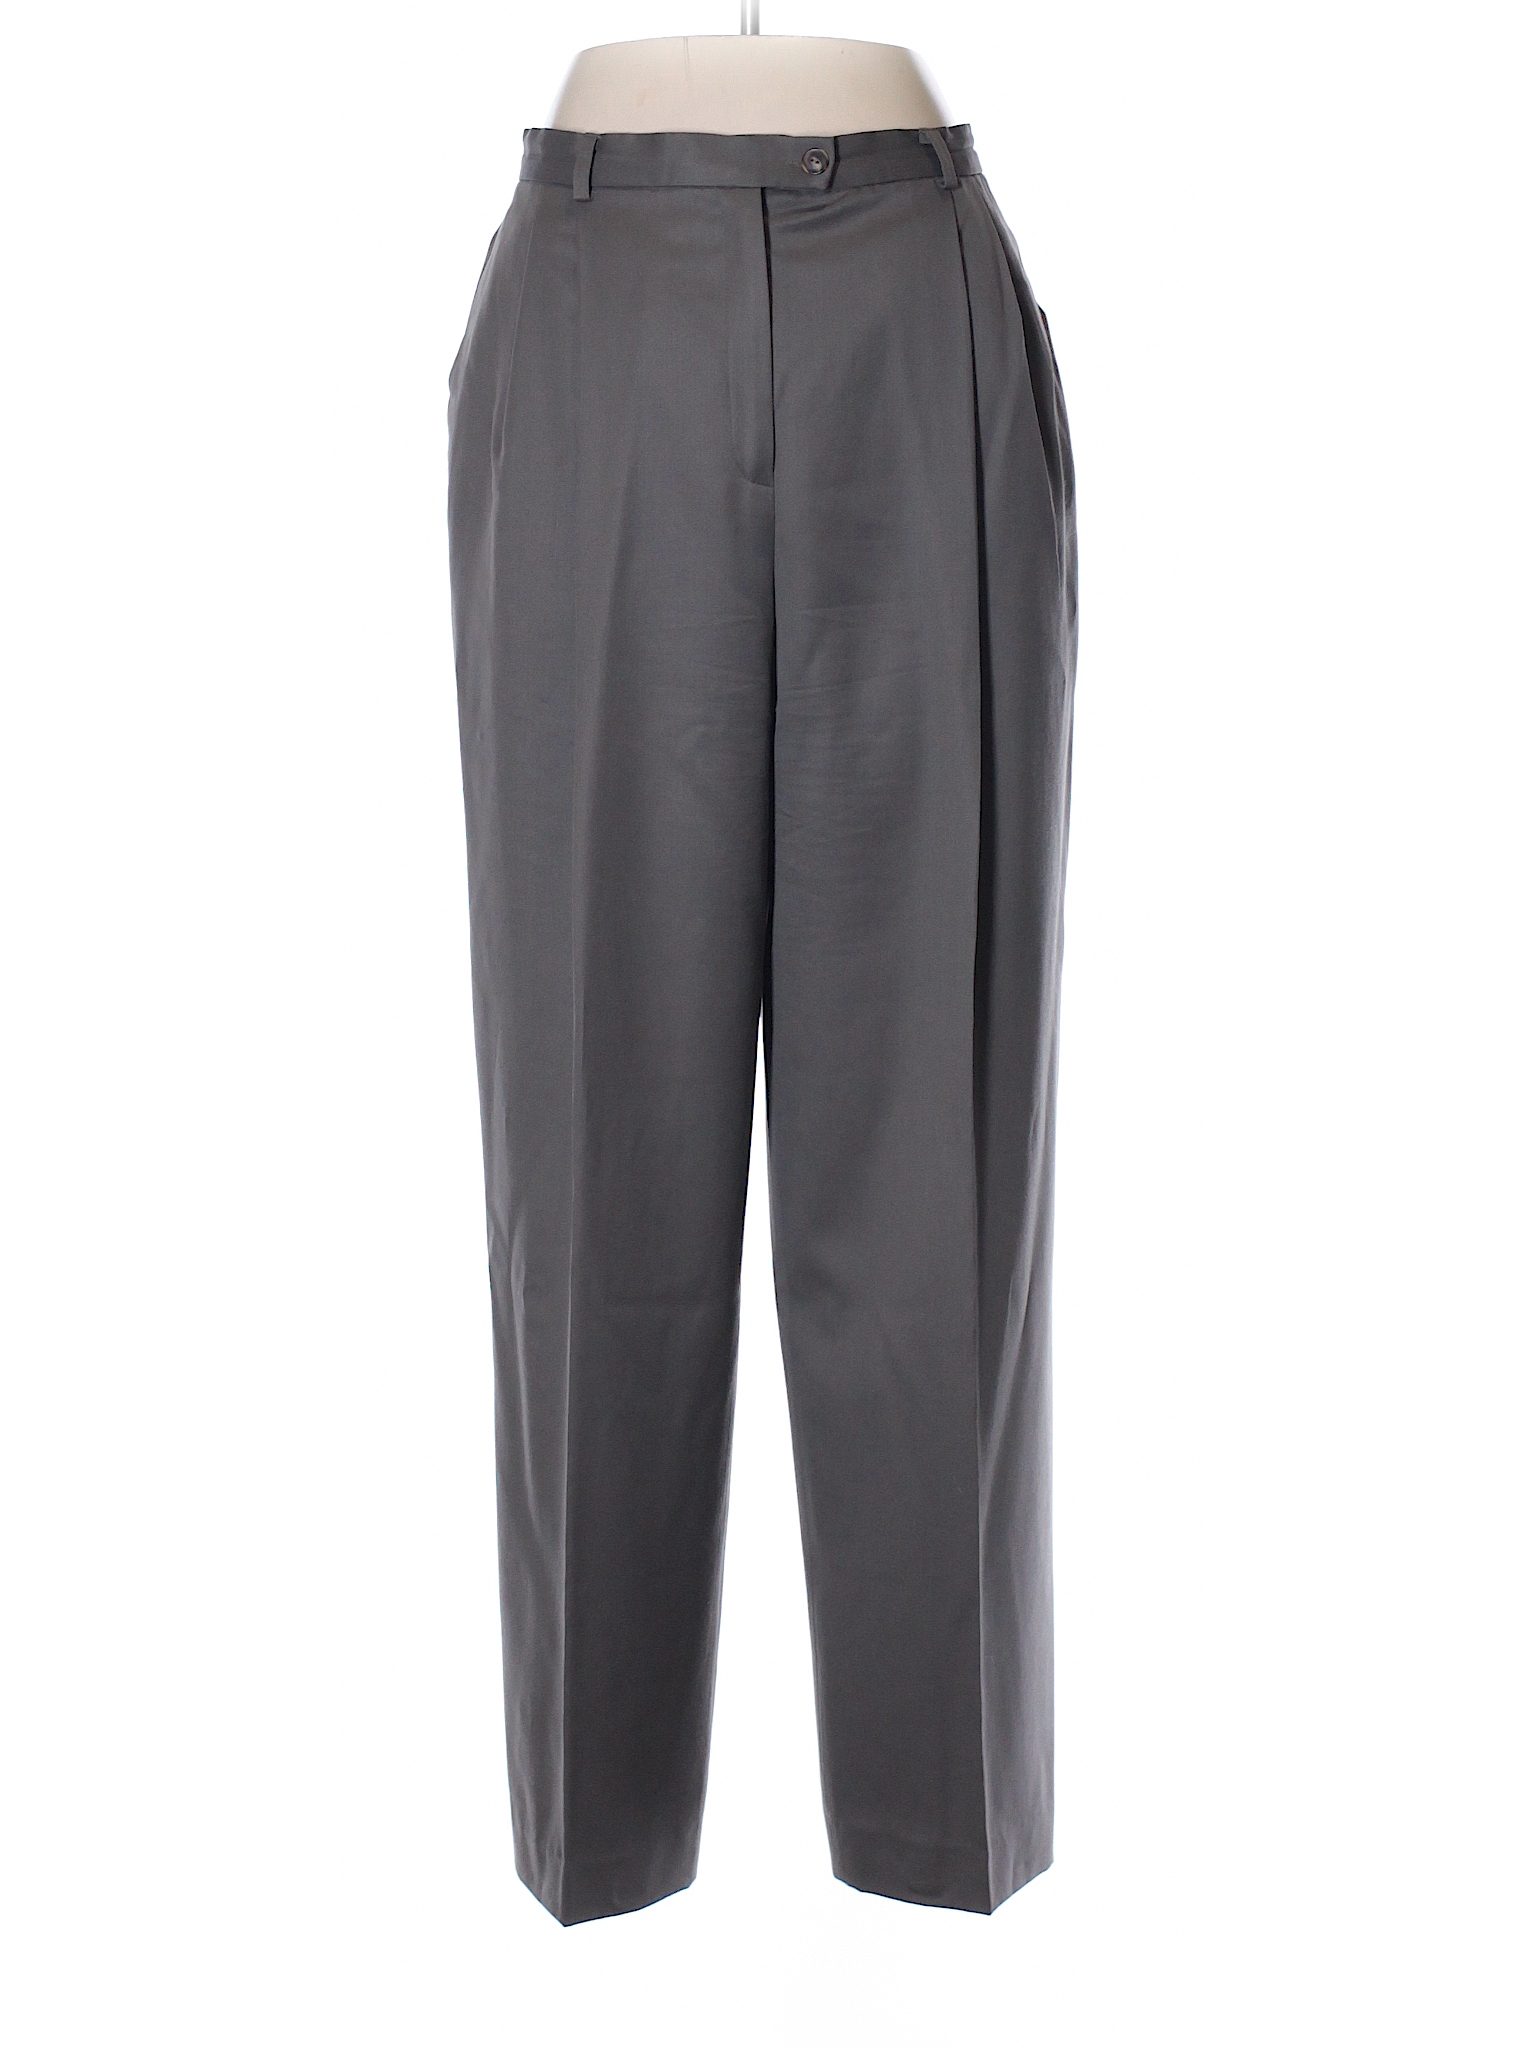 Lafayette 148 New York Wool Pants - 92% off only on thredUP